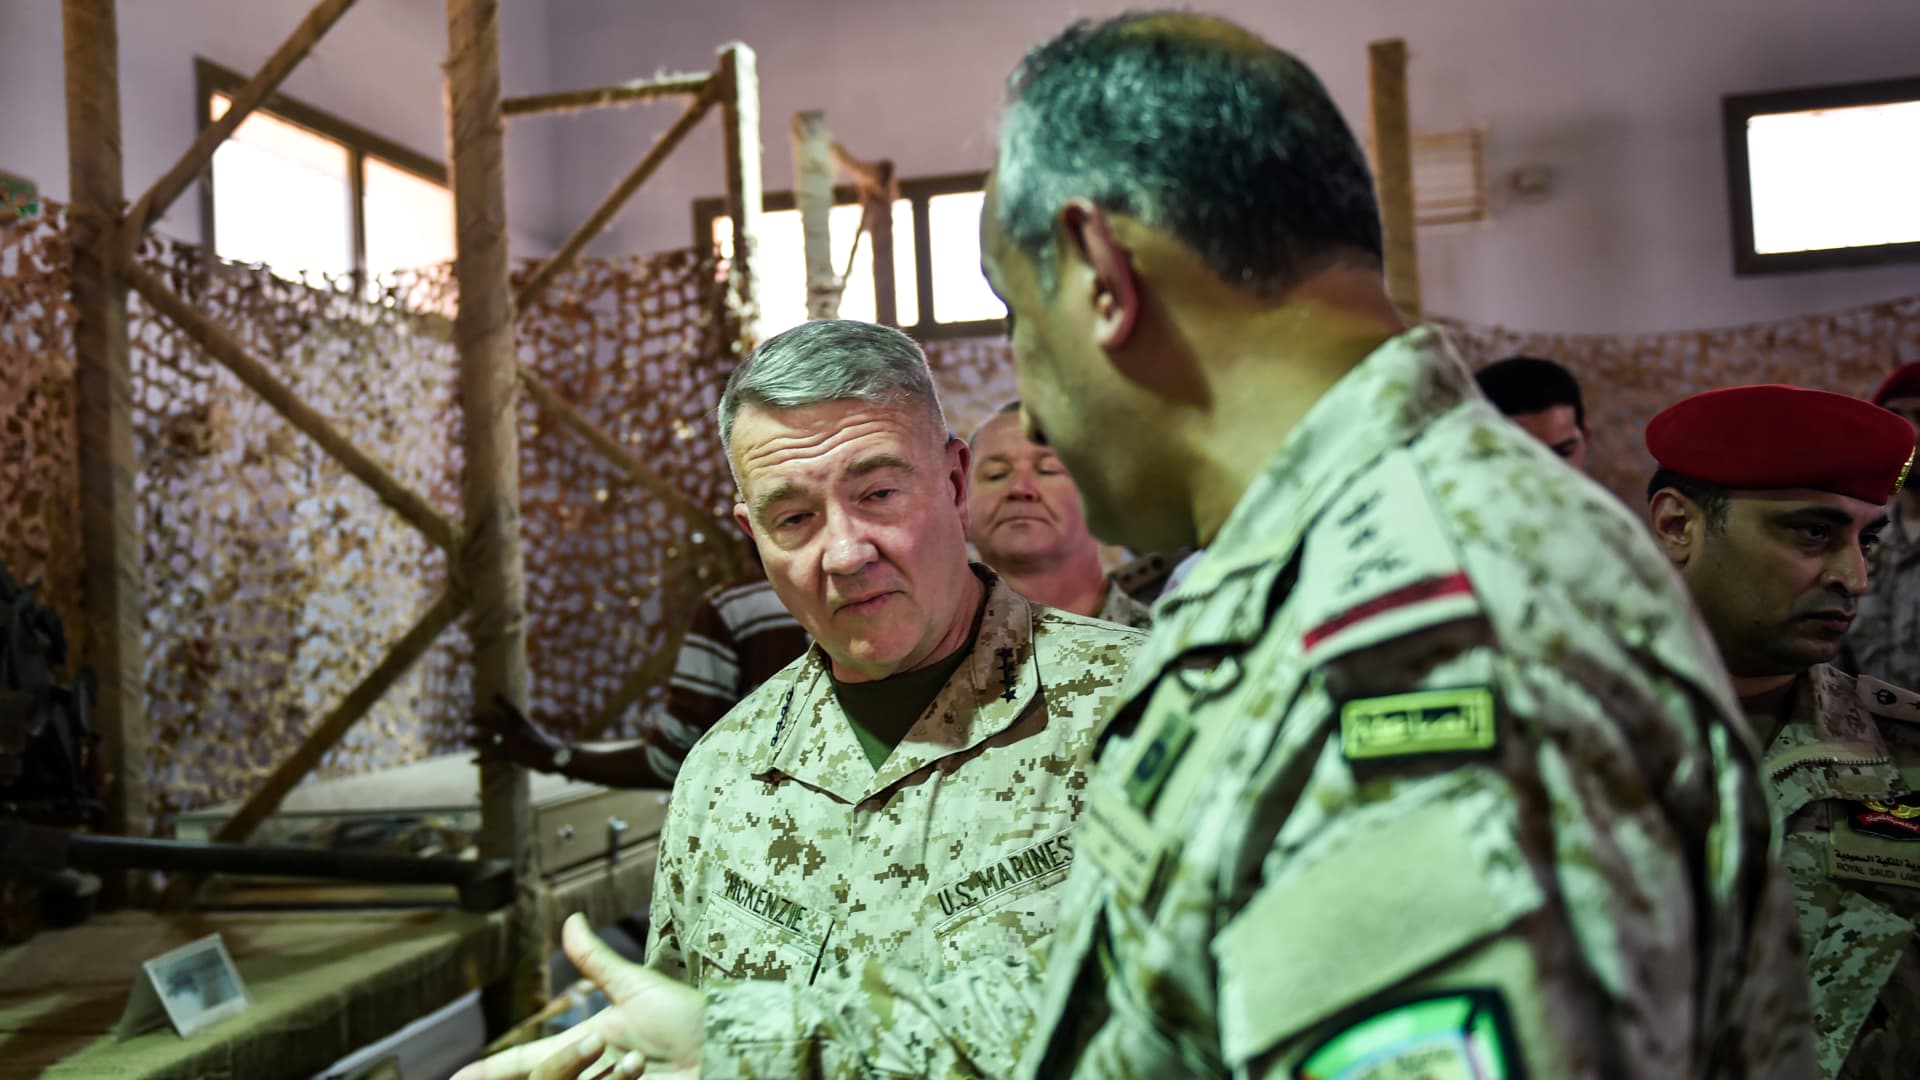 US Marine Corps General Kenneth F. McKenzie Jr. (C, behind), commander of the US Central Command (CENTCOM) and Lieutenant General Fahd bin Turki bin Abdulaziz al-Saud (front), commander of the Saudi-led coalition forces in Yemen, are shown reportedly Iranian weapons seized by Saudi forces from Yemen's Huthi rebels, during his visit to a military base in al-Kharj in central Saudi Arabia on July 18, 2019.